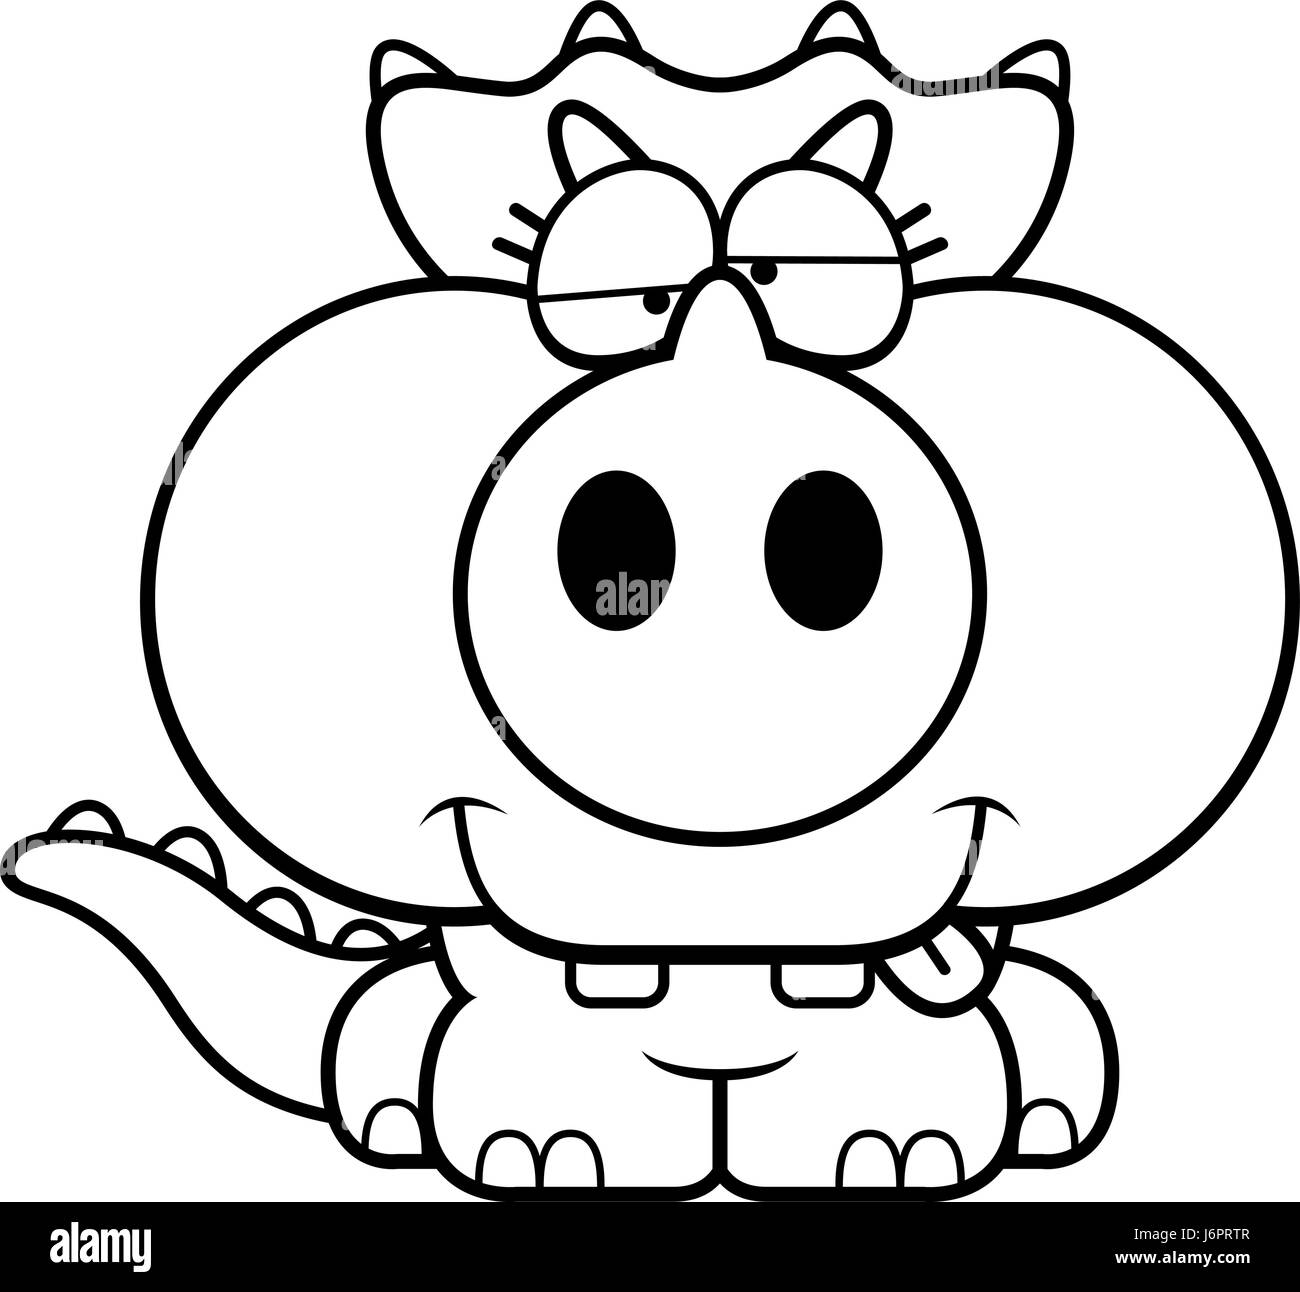 A cartoon illustration of a little Triceratops dinosaur with a goofy expression. Stock Vector